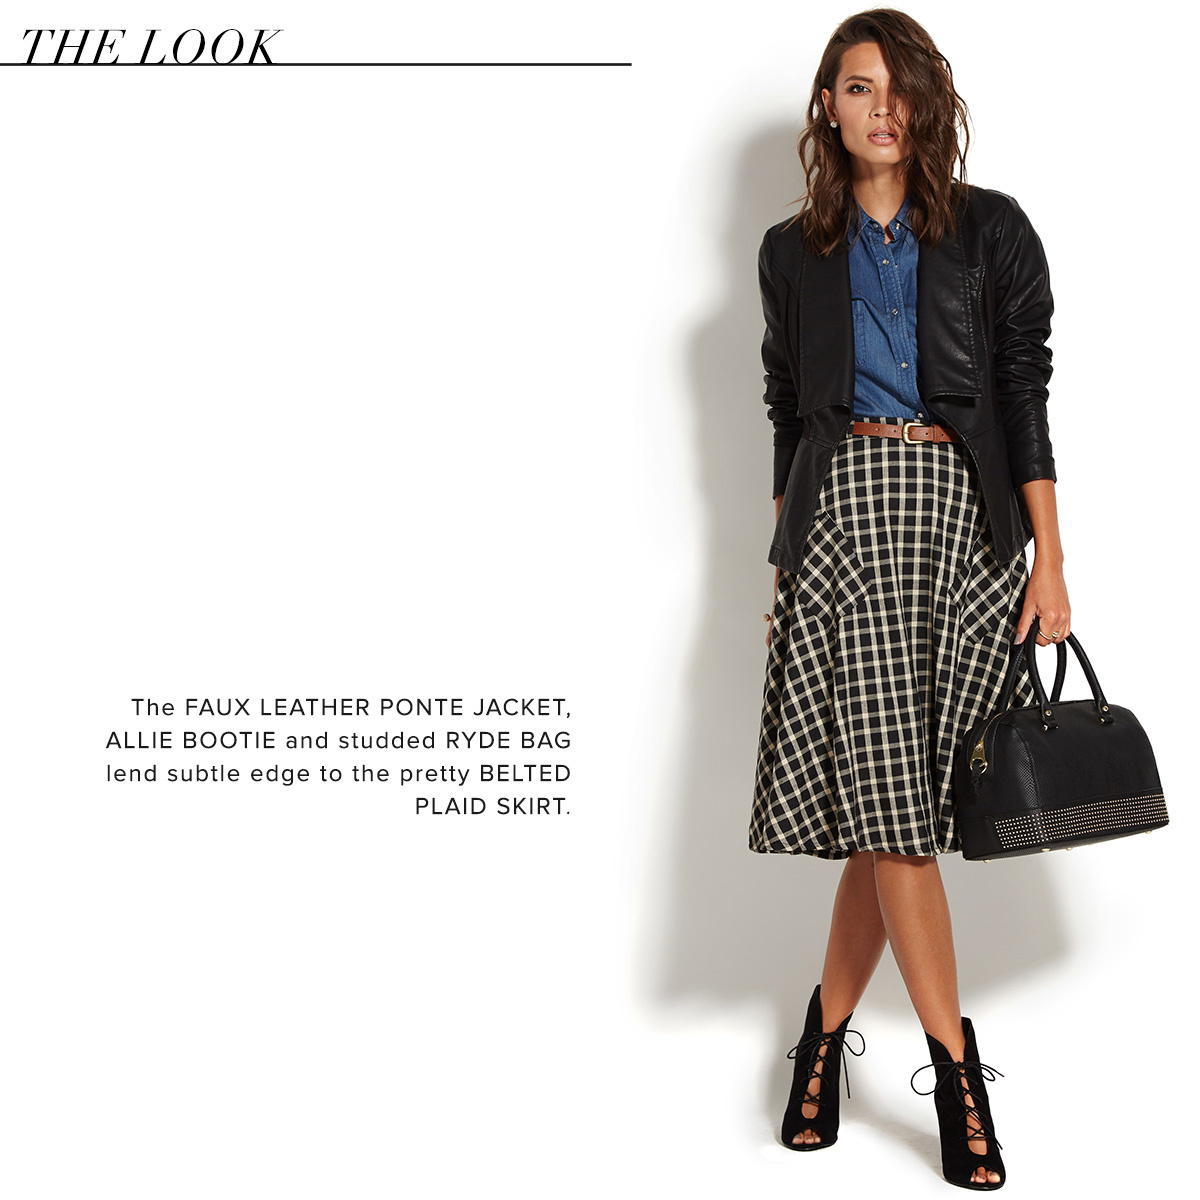 BELTED PLAID SKIRT - ShoeDazzle